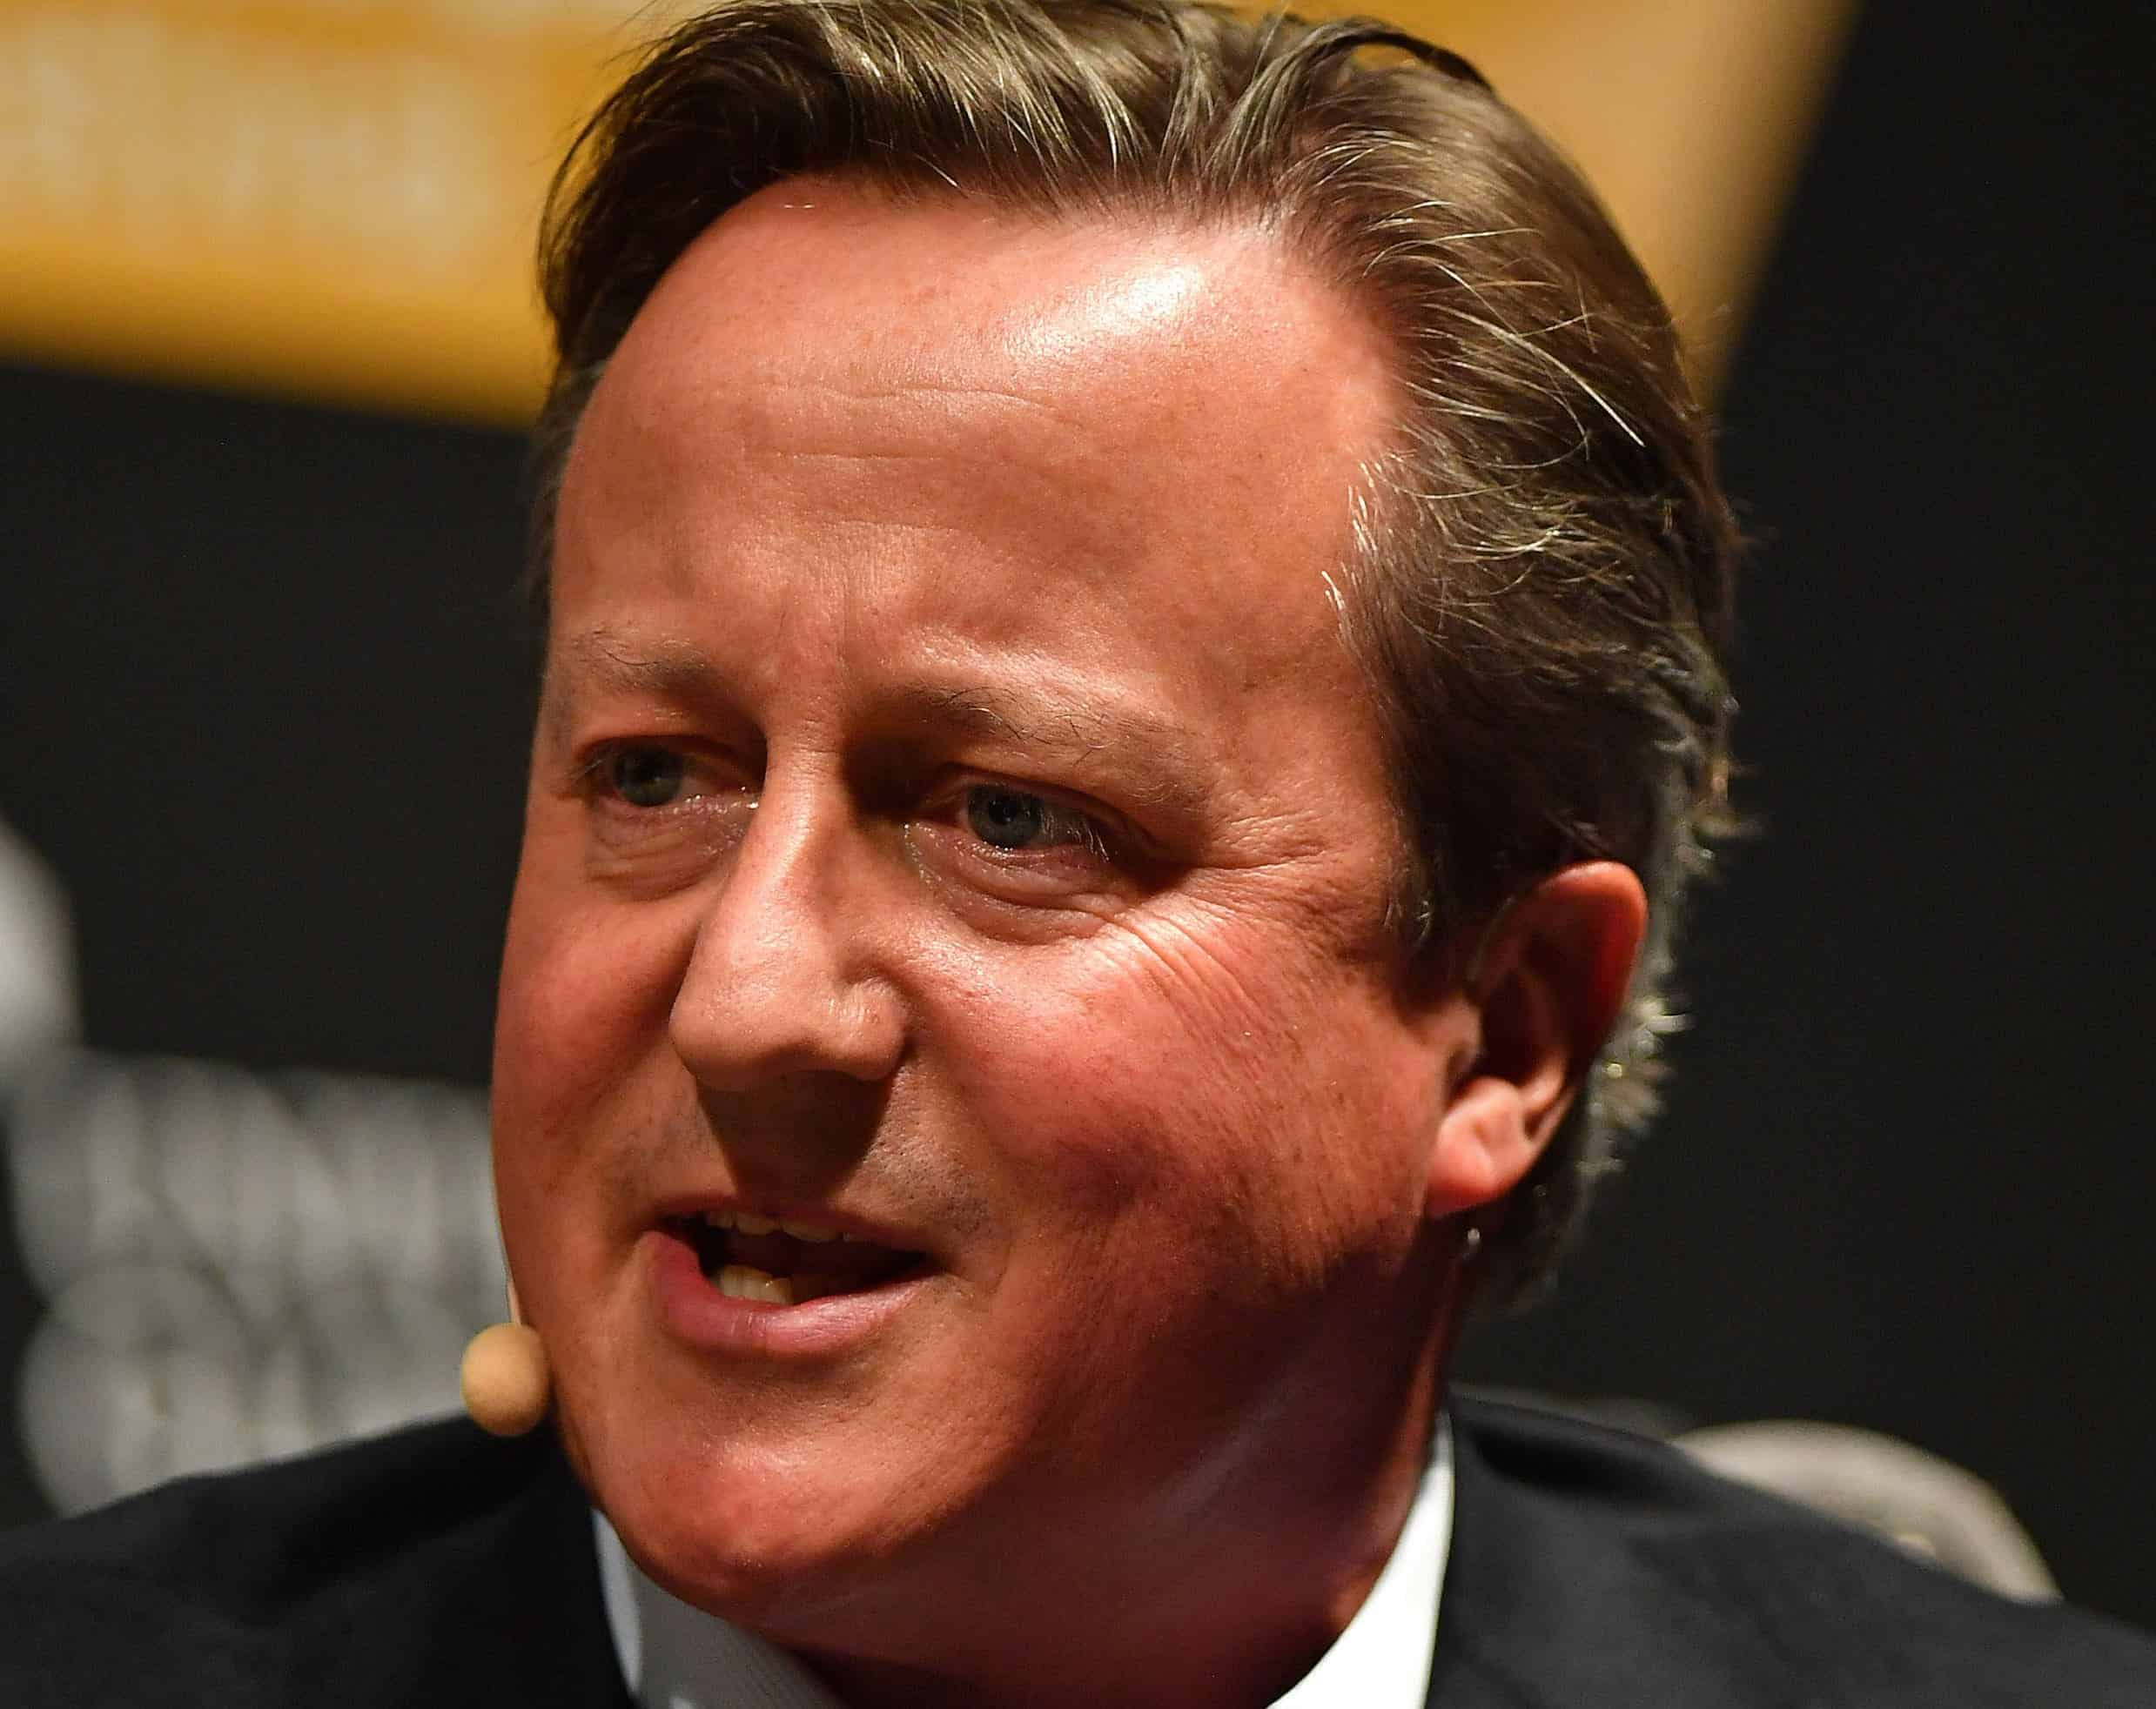 ‘Woefully inadequate’: Firm David Cameron lobbied for puts £335m of YOUR cash at ‘increased risk’